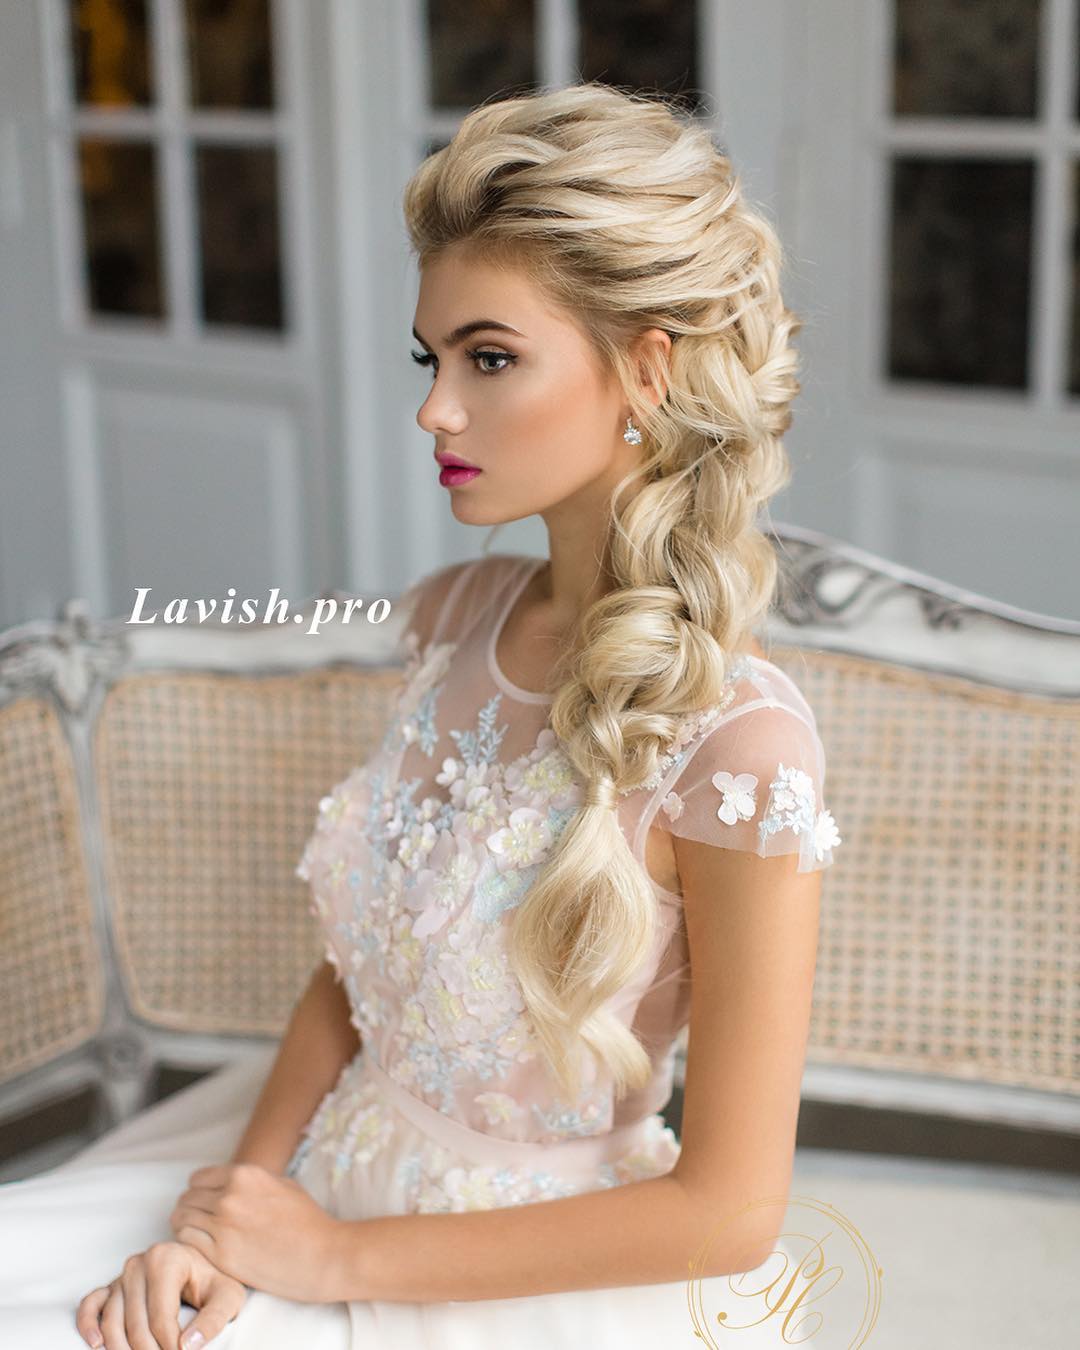 Beautiful Wedding Hairstyles for Long Hair - Bride Hairstyle Designs